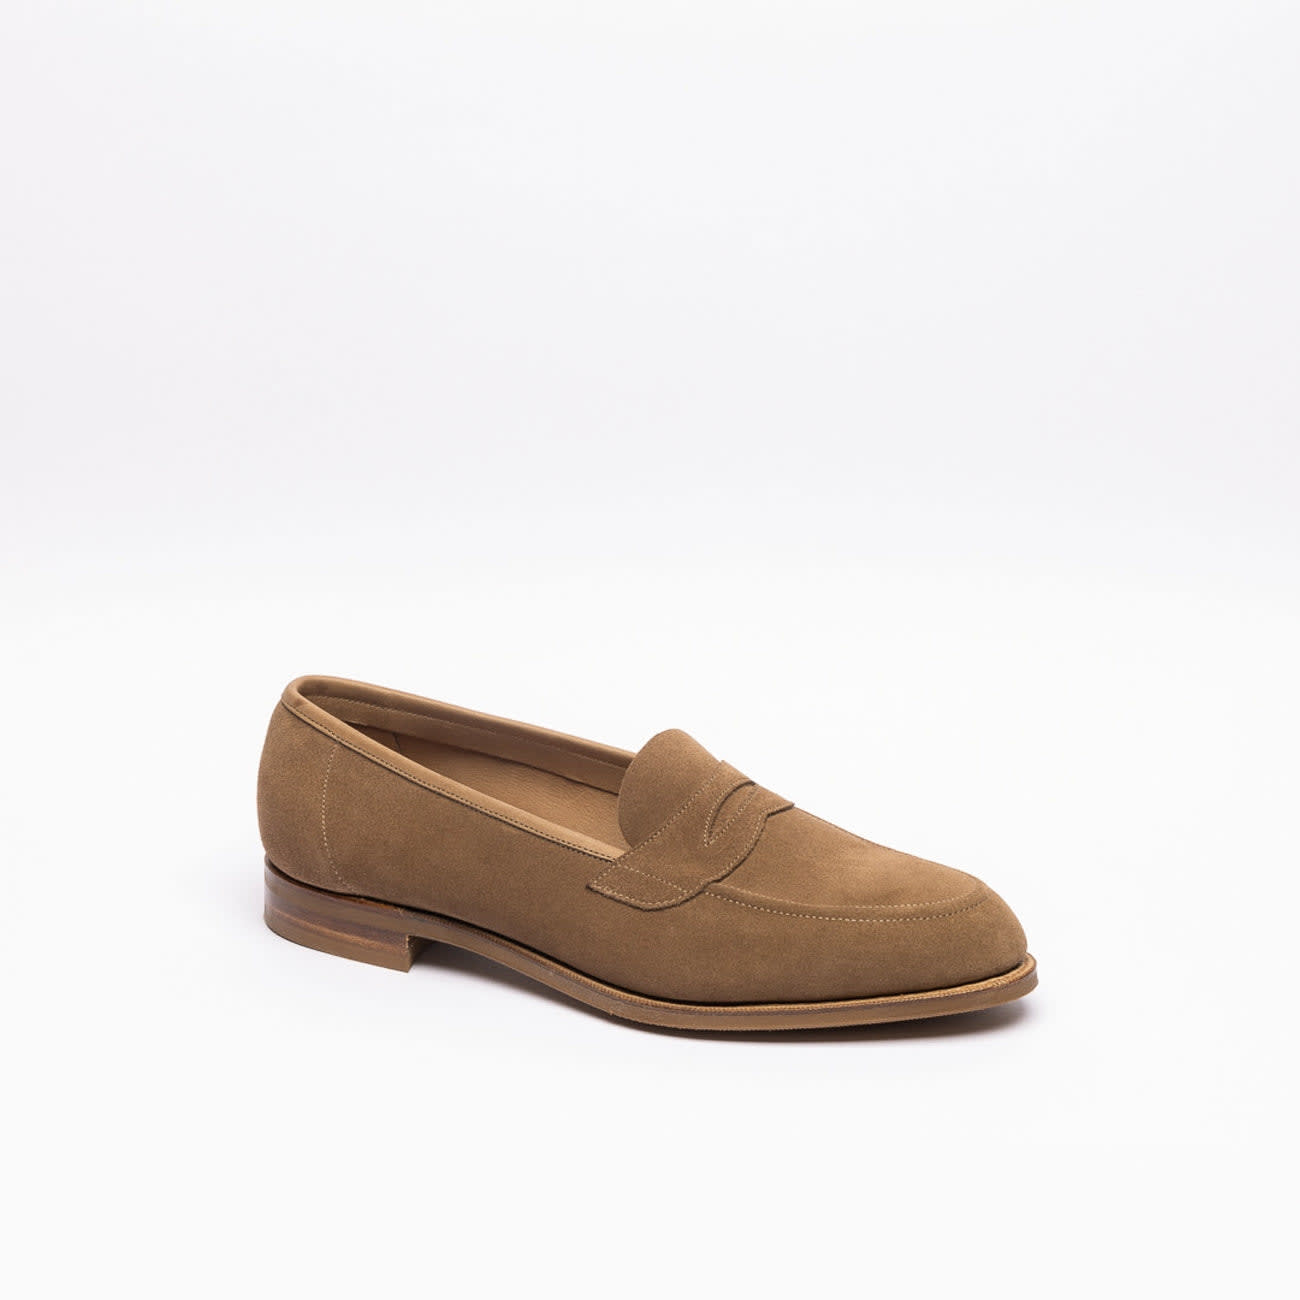 Mole Suede Loafer